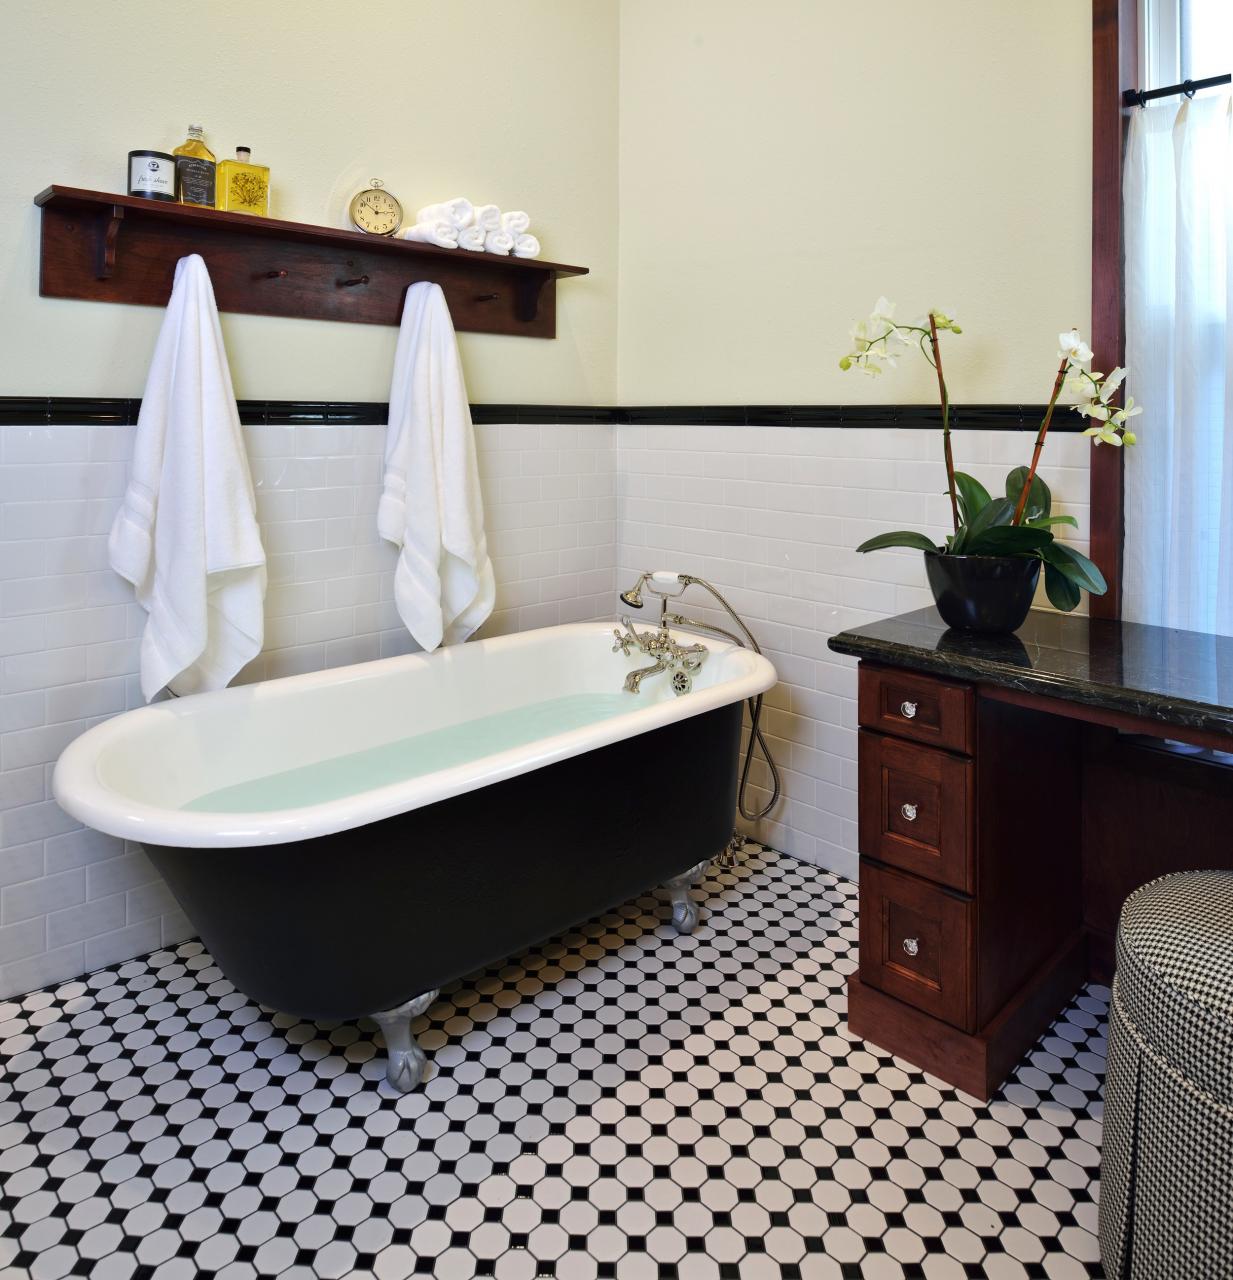 BEFORE & AFTER This VintageInspired Master Bathroom Is An Instant